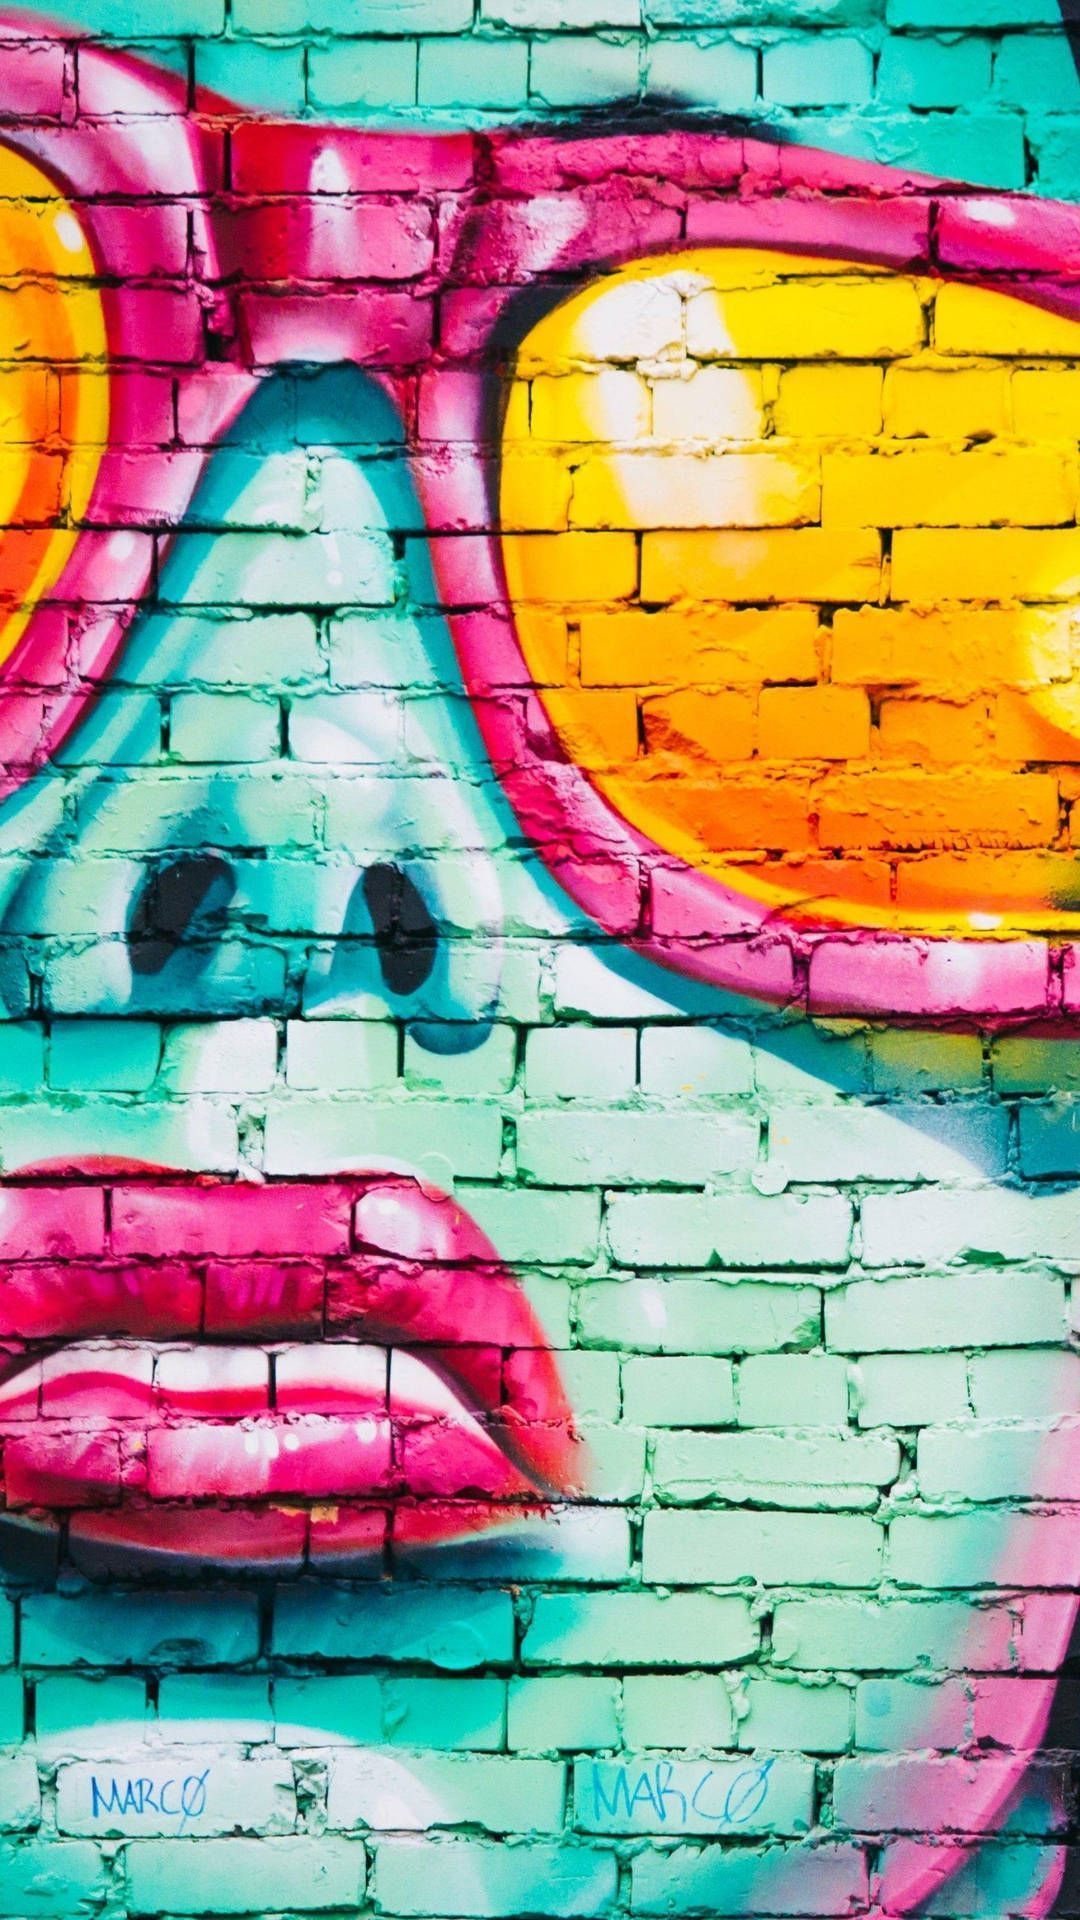 IPhone wallpaper with graffiti art of a face with sunglasses on a brick wall - Graffiti